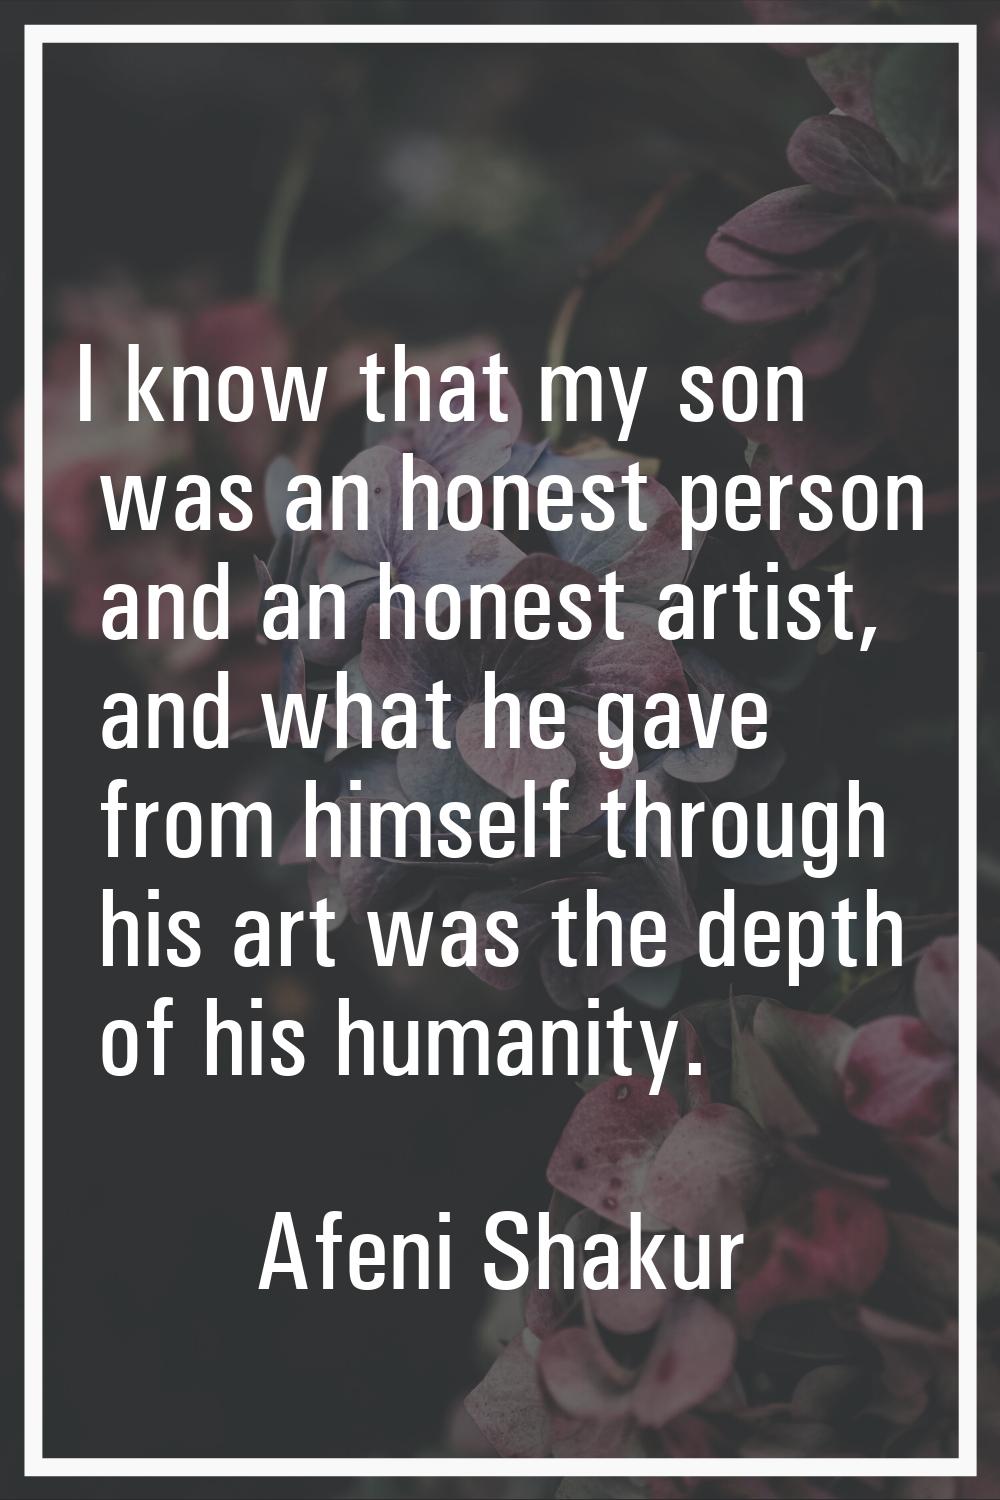 I know that my son was an honest person and an honest artist, and what he gave from himself through